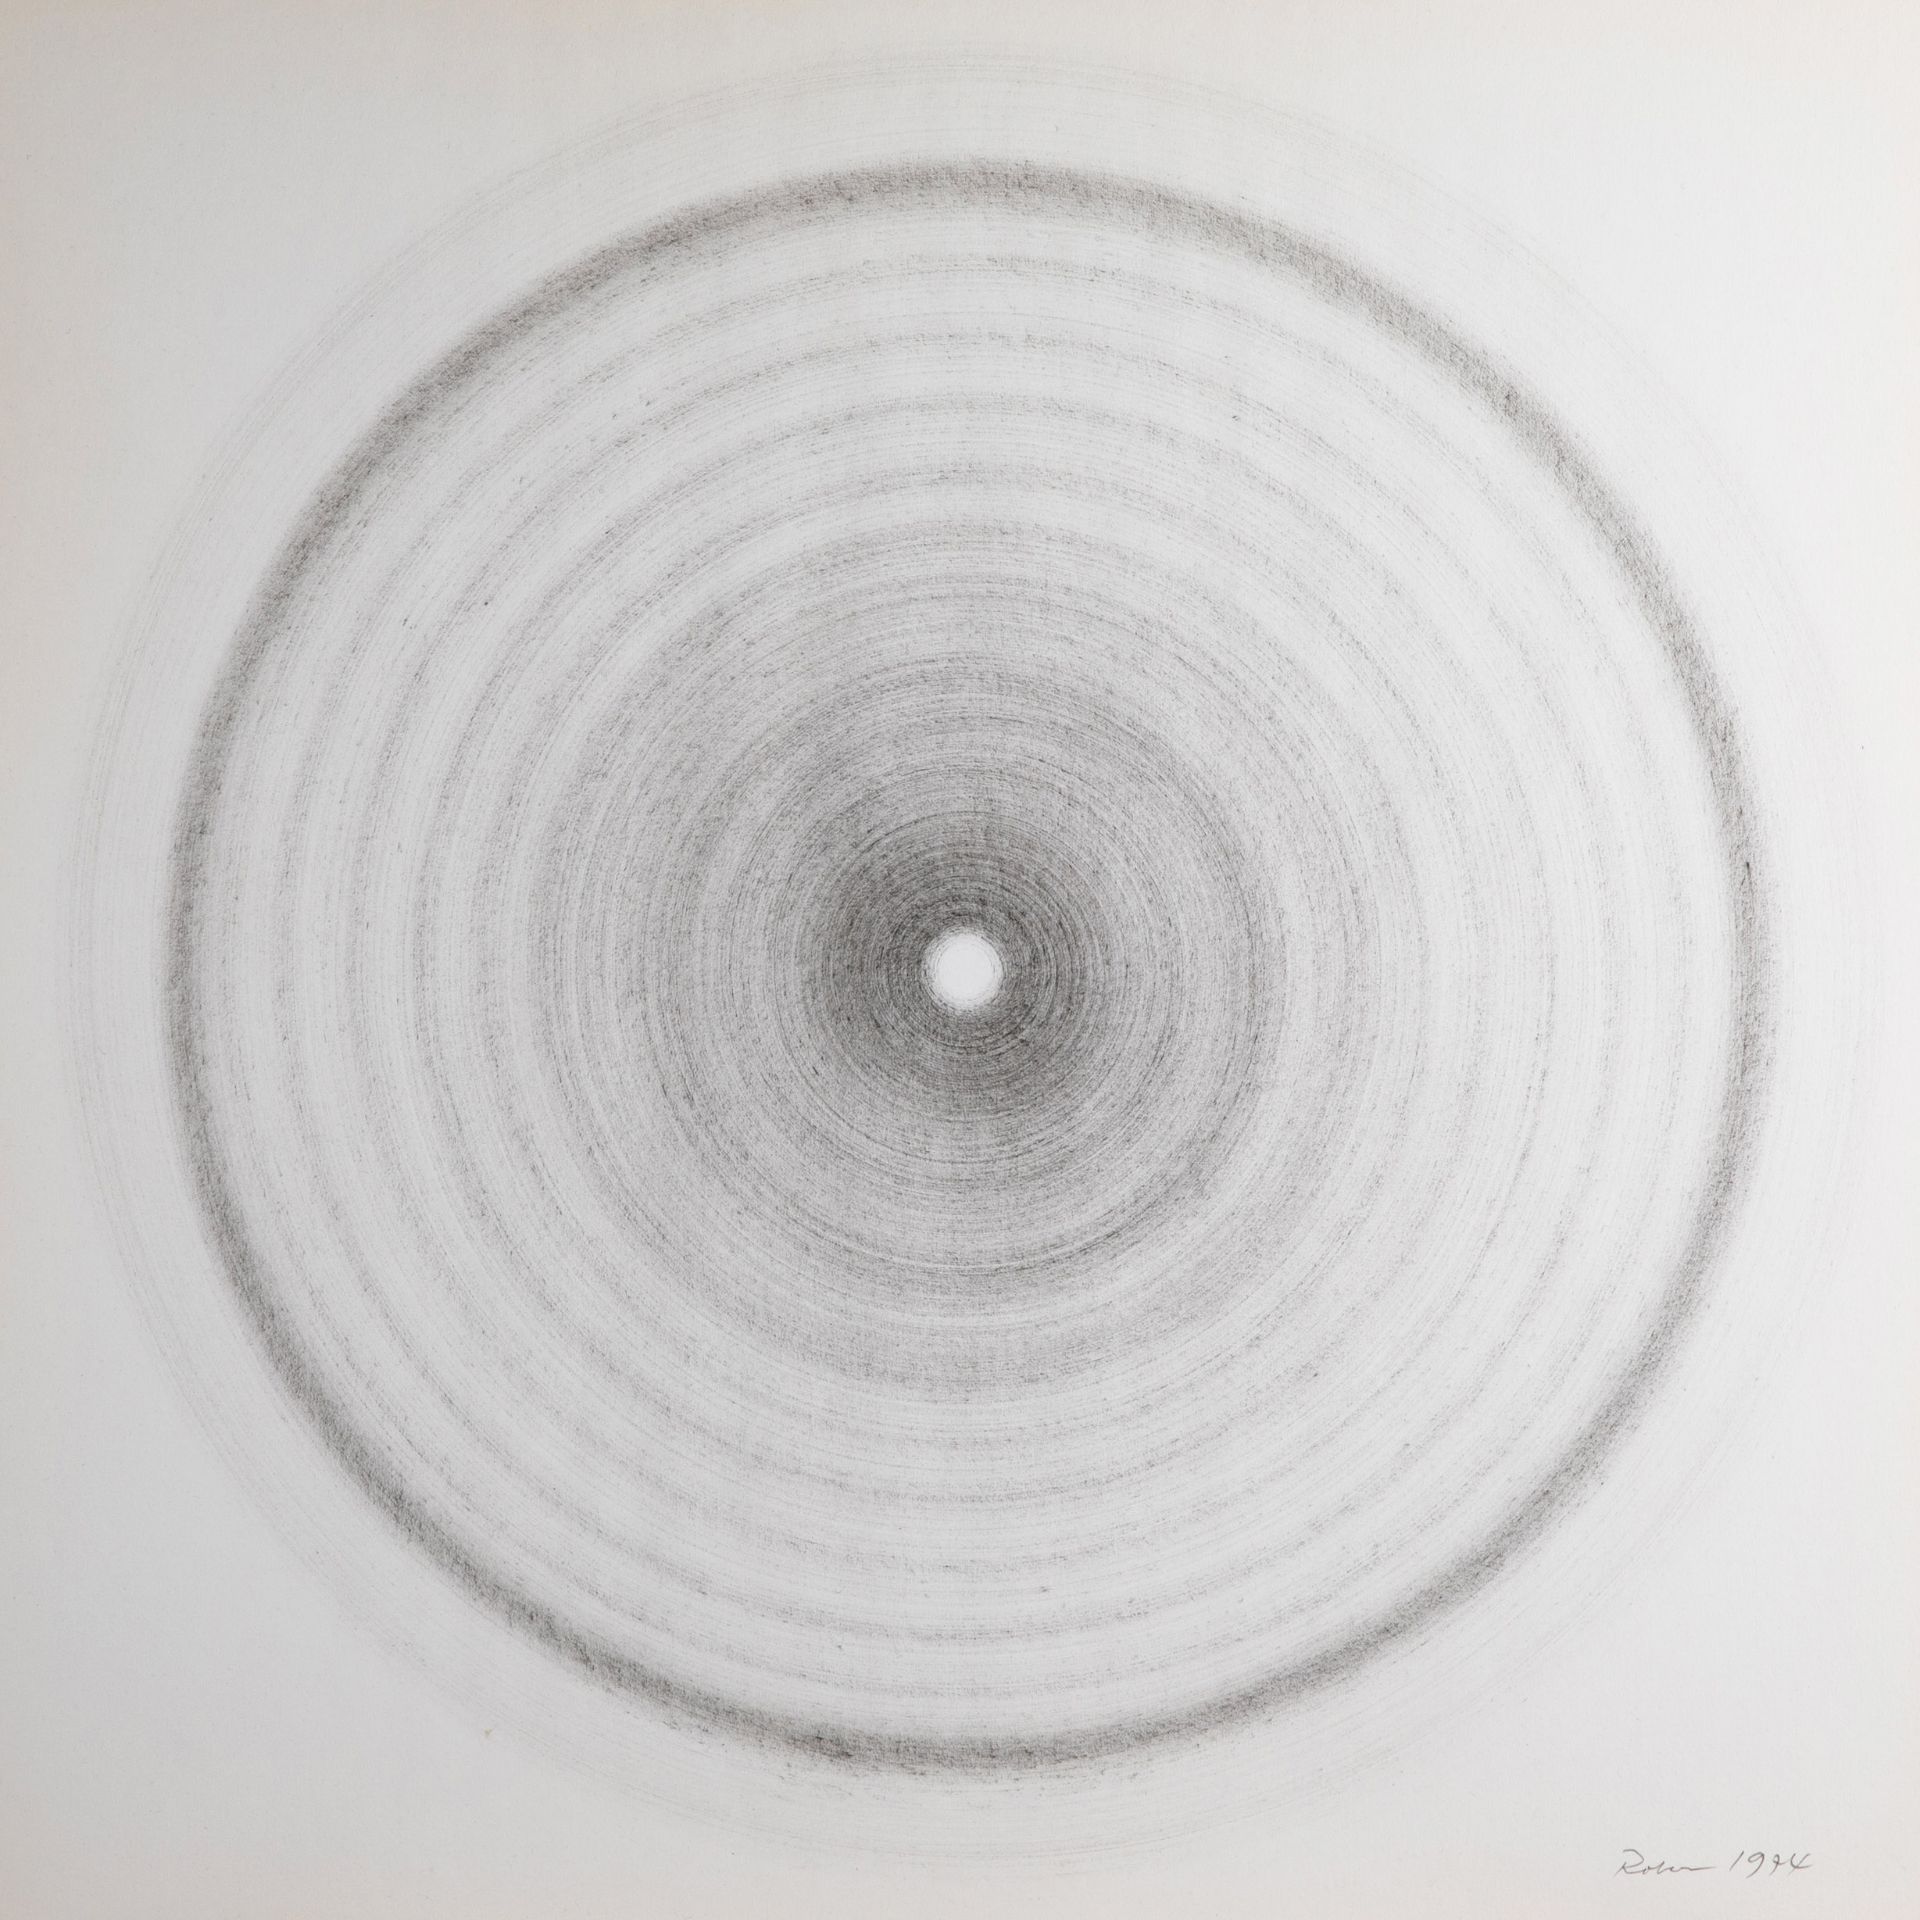 Robert Rotar, Untitled. Rotation. 1974. Pencil on paper